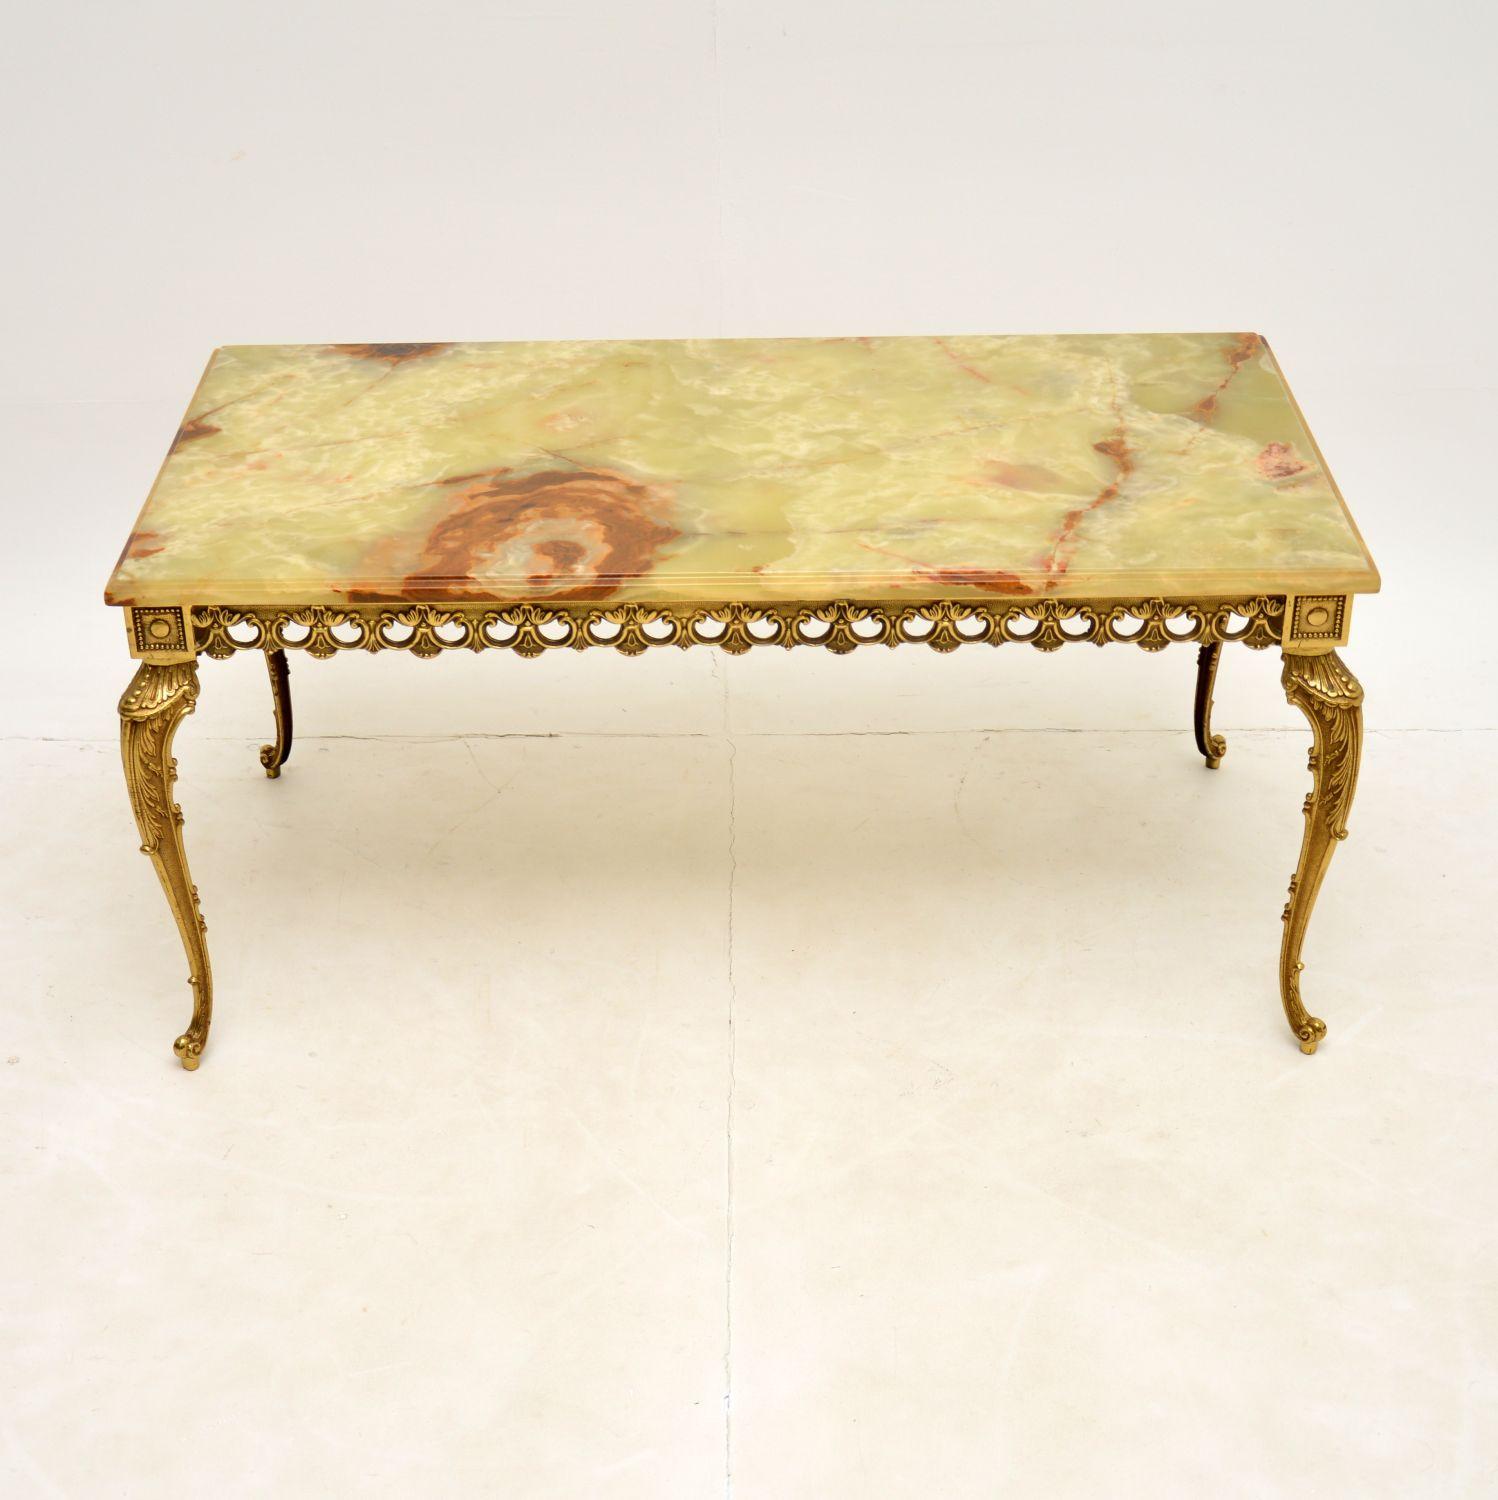 A stunning antique brass & onyx top coffee table. This was made in France, it dates from around the 1920-30’s.

The quality is excellent, this has a beautifully detailed solid brass frame. The onyx top has stunning colours and patterns, and is